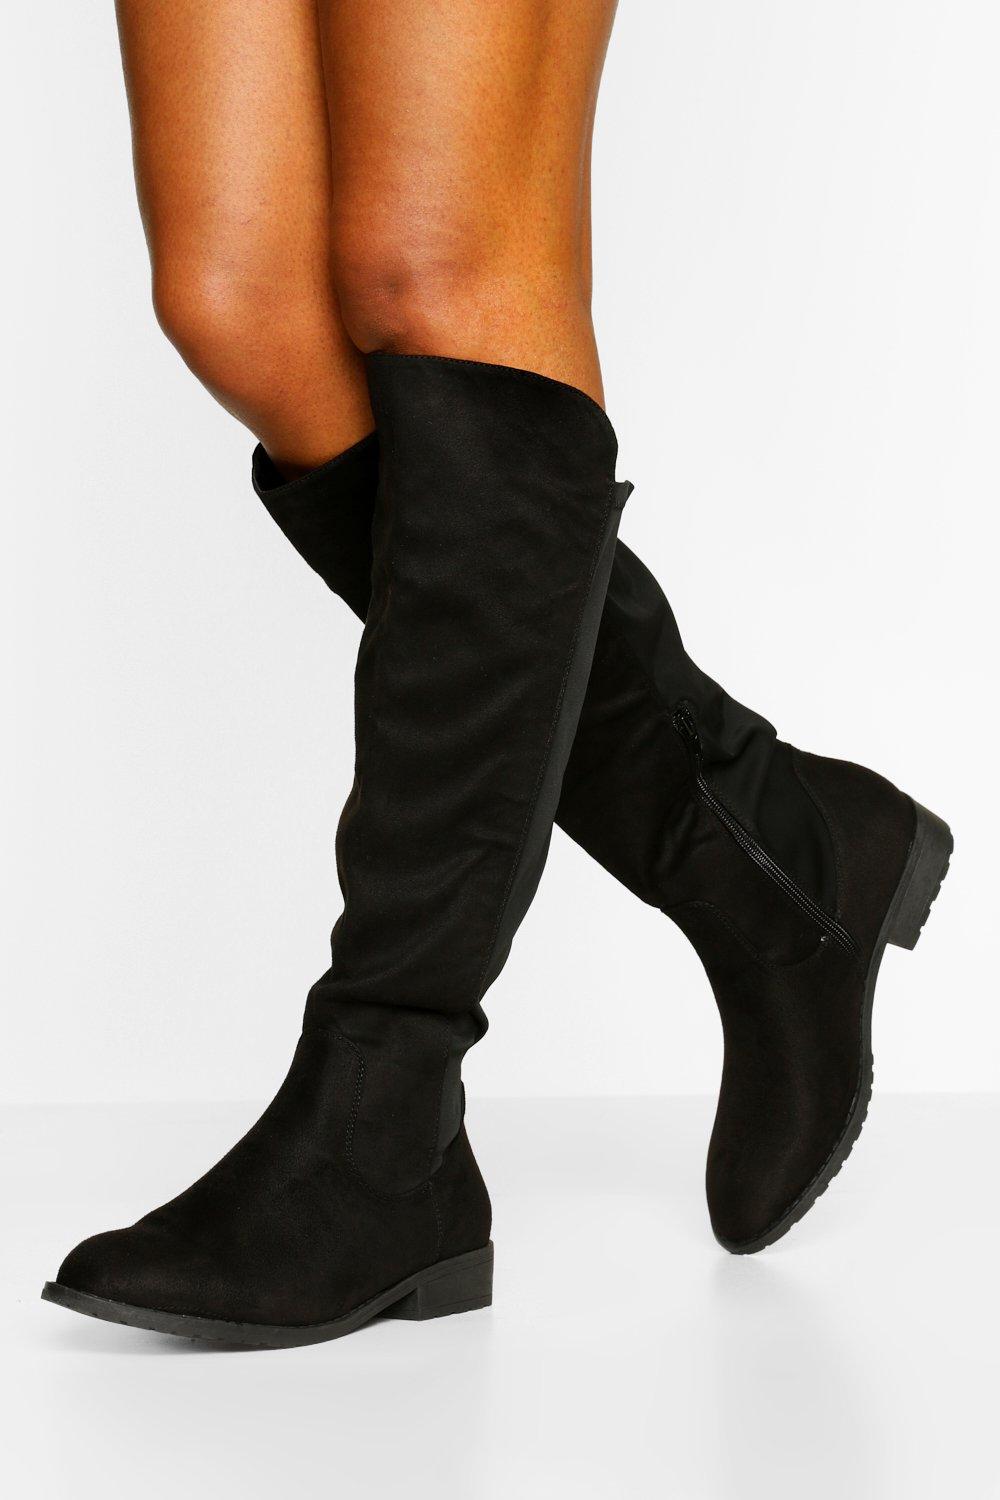 Petite Fit Knee High Riding Boots 